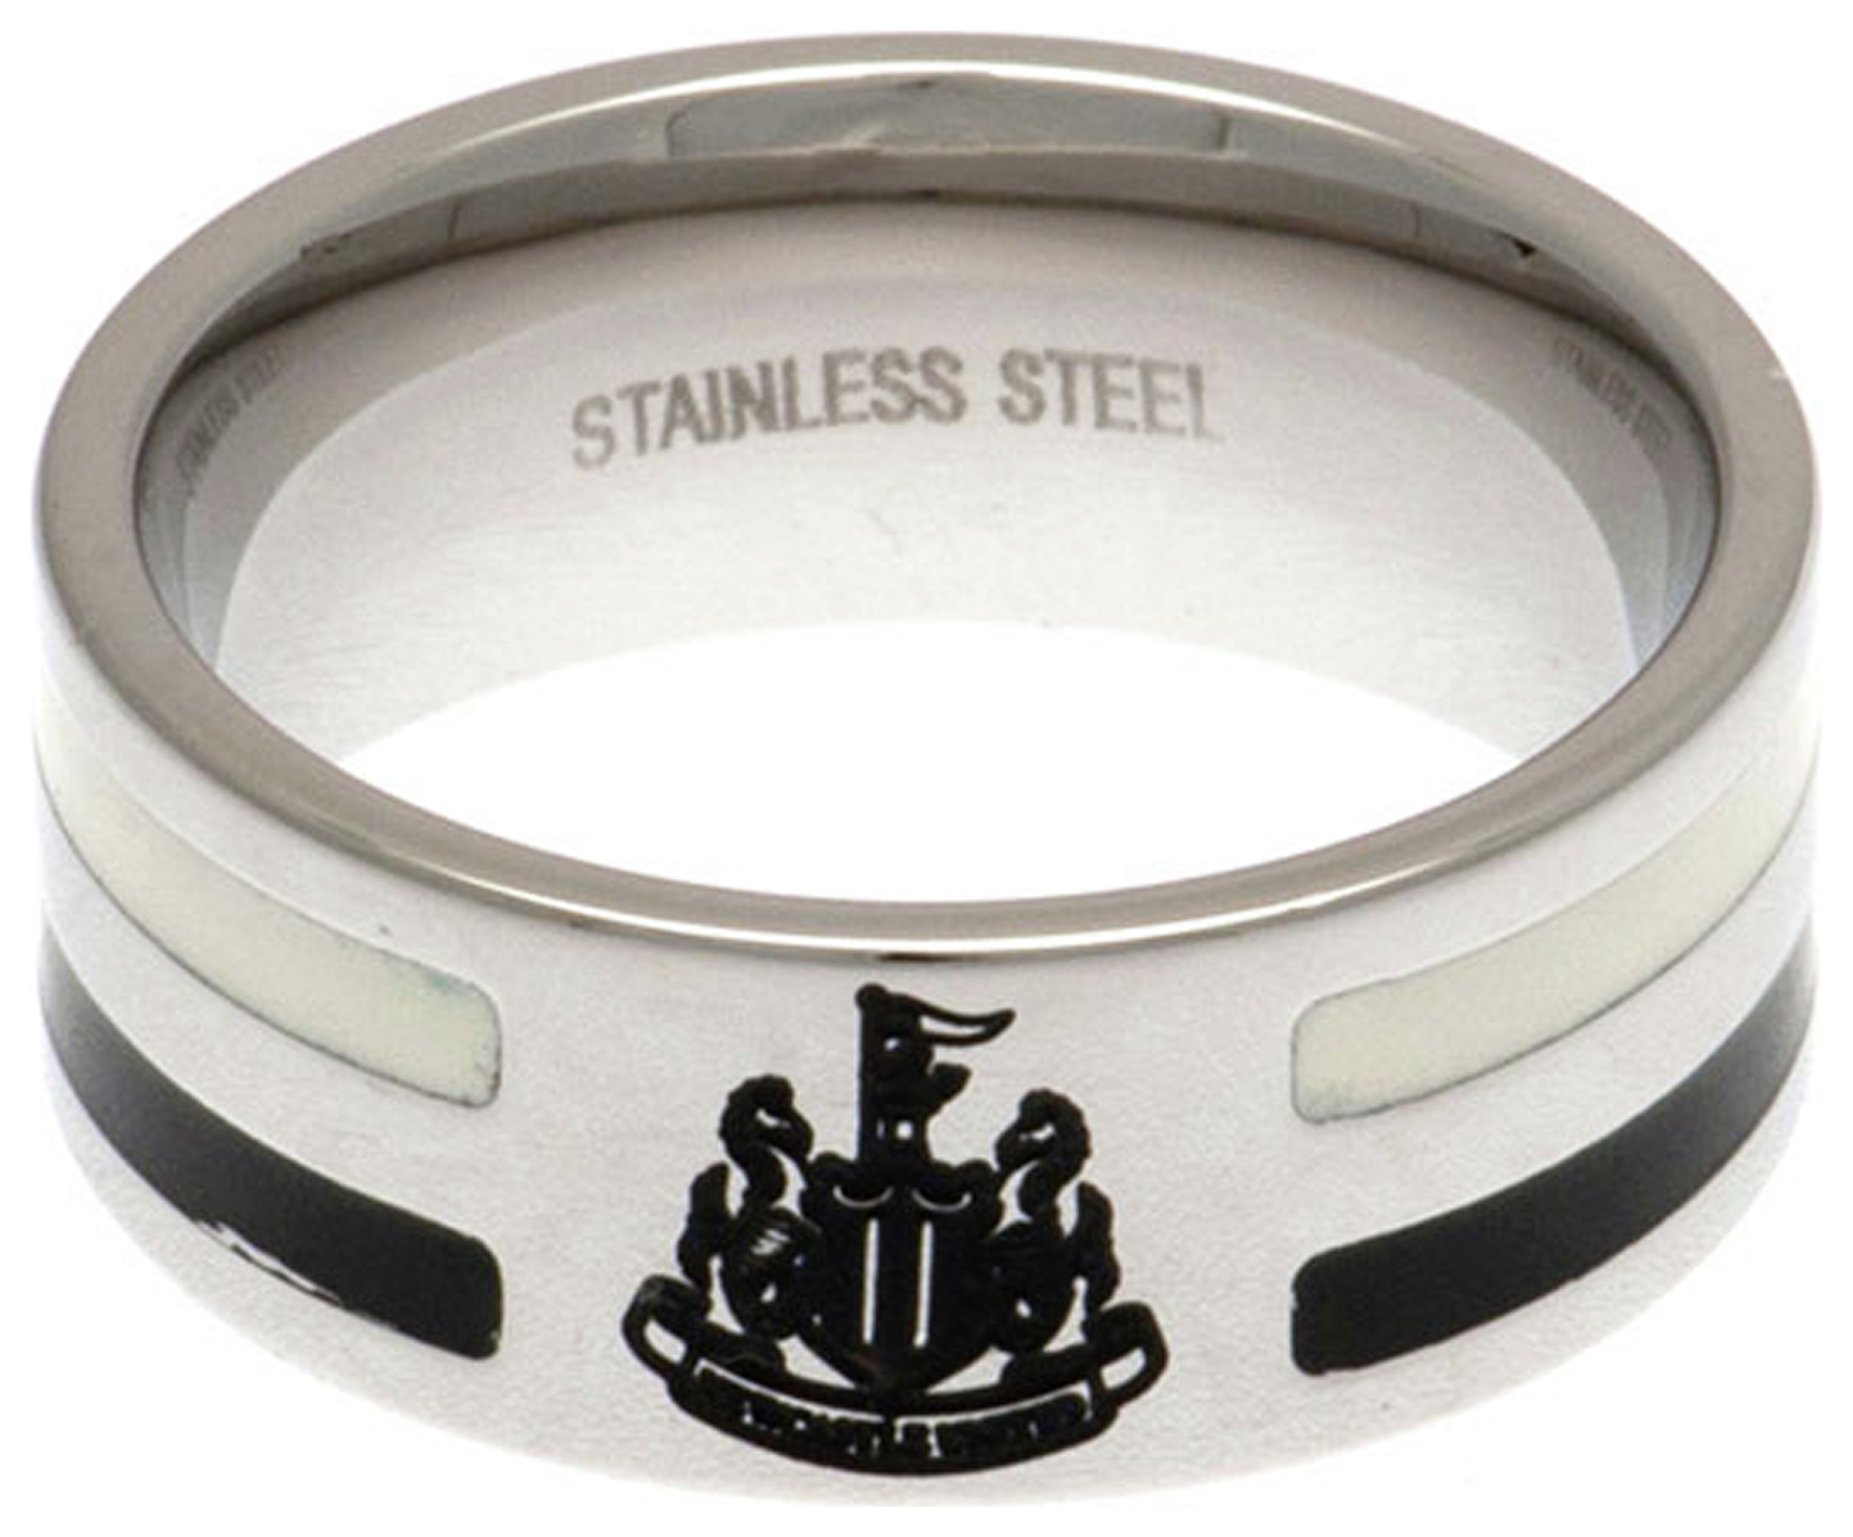 Stainless Steel Newcastle Striped Ring - Size U